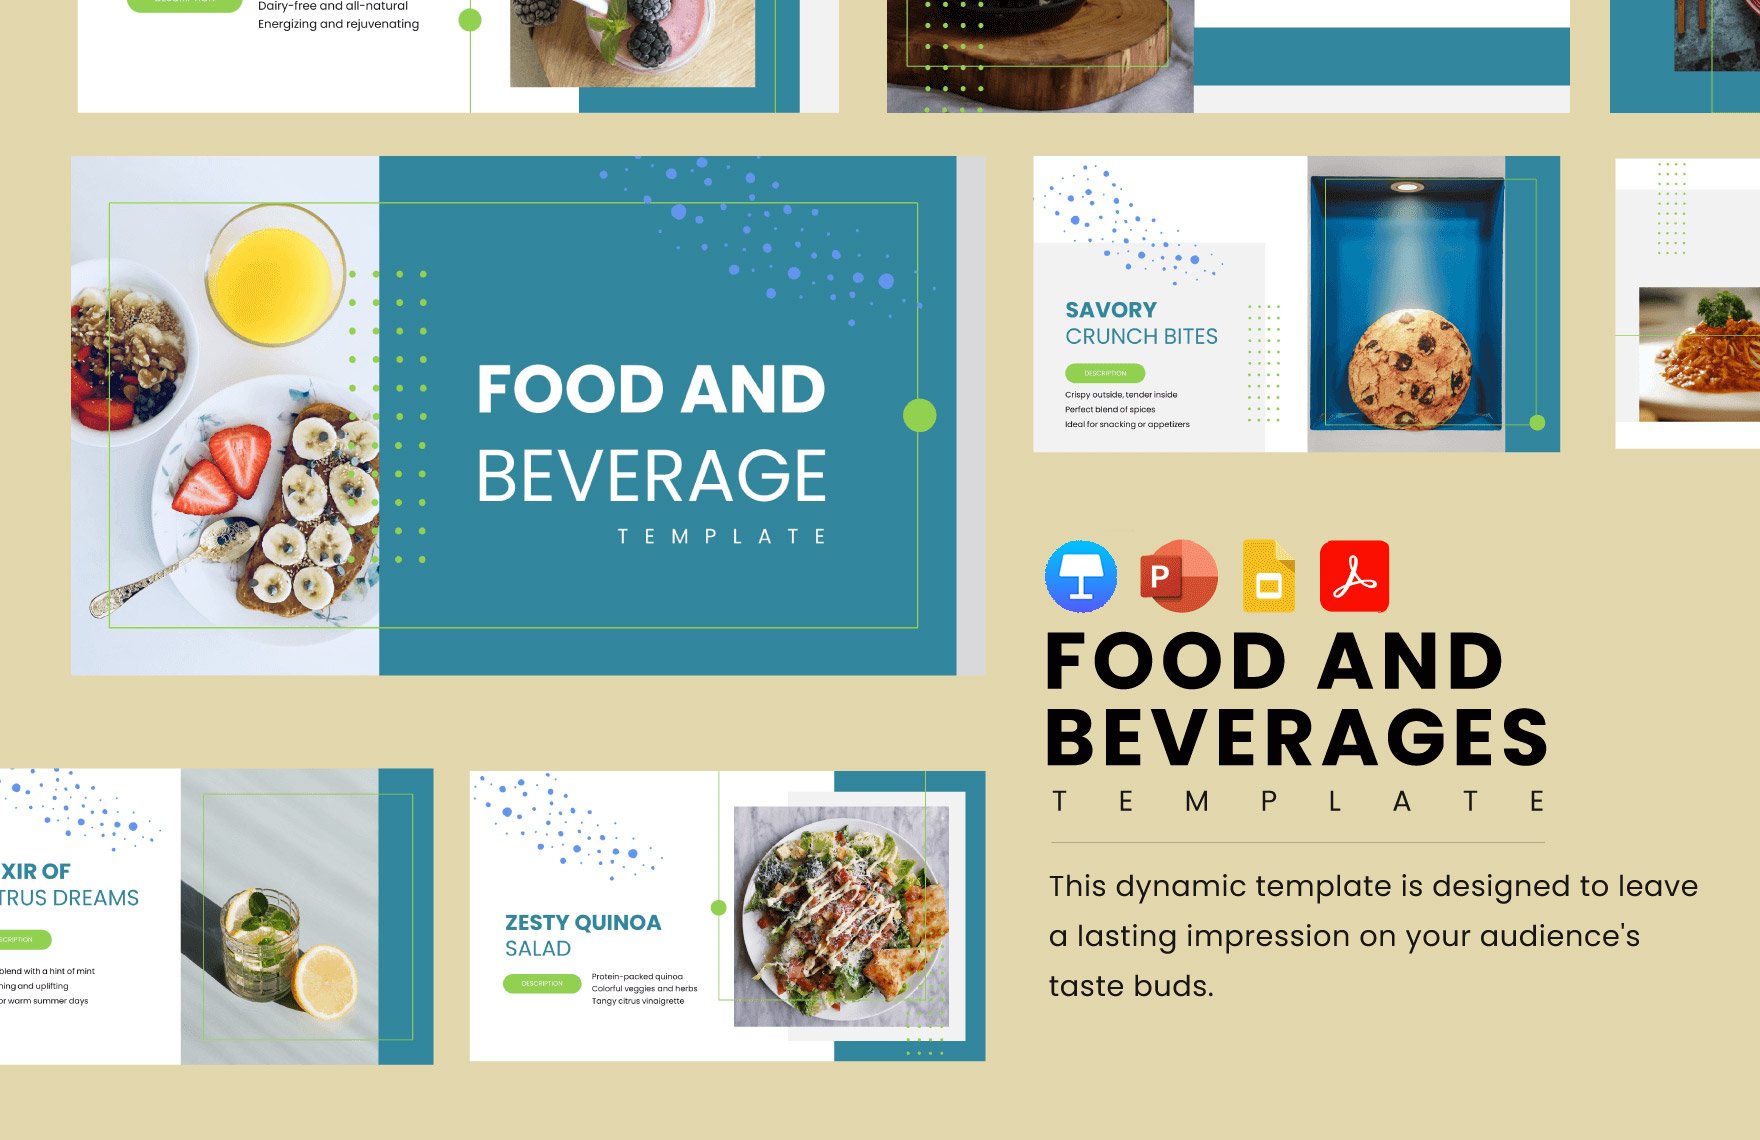 Food and Beverage Template